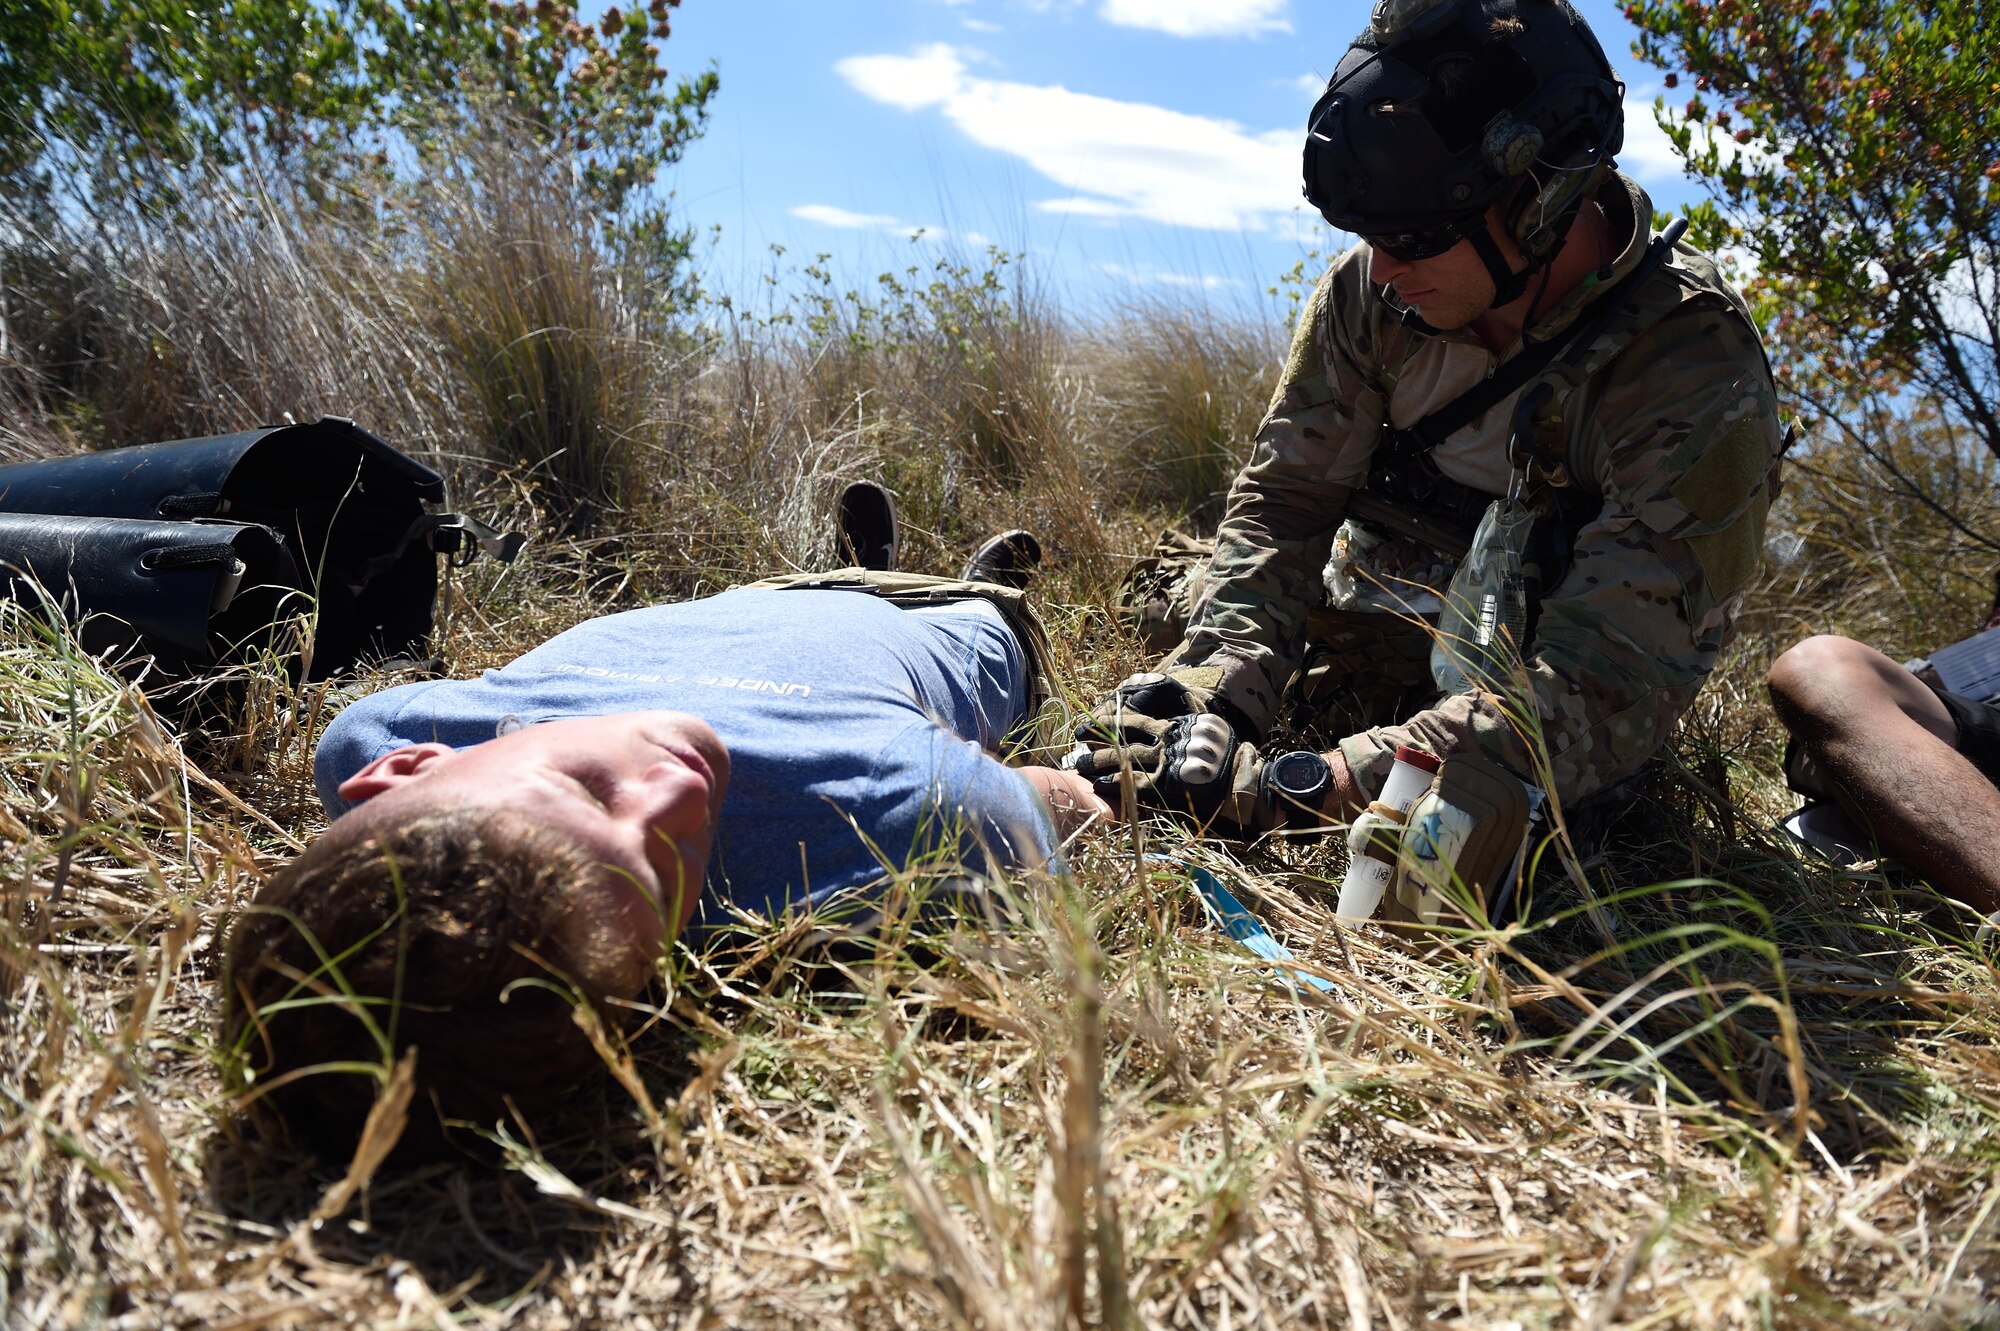 An Air Force pararescueman with the 320th Special Tactics Squadron provides emergency trauma medical care to a citizen who was injured in a simulated earthquake during a humanitarian assistance and disaster response scenario as part of Rim of the Pacific 2016, Pohakuloa Training Area, Hawaii, July 10, 2016. The world's largest international maritime exercise, this year is the 25th exercise in the series that began in 1971.(U.S. Air Force photo by 2nd Lt. Jaclyn Pienkowski/Released)